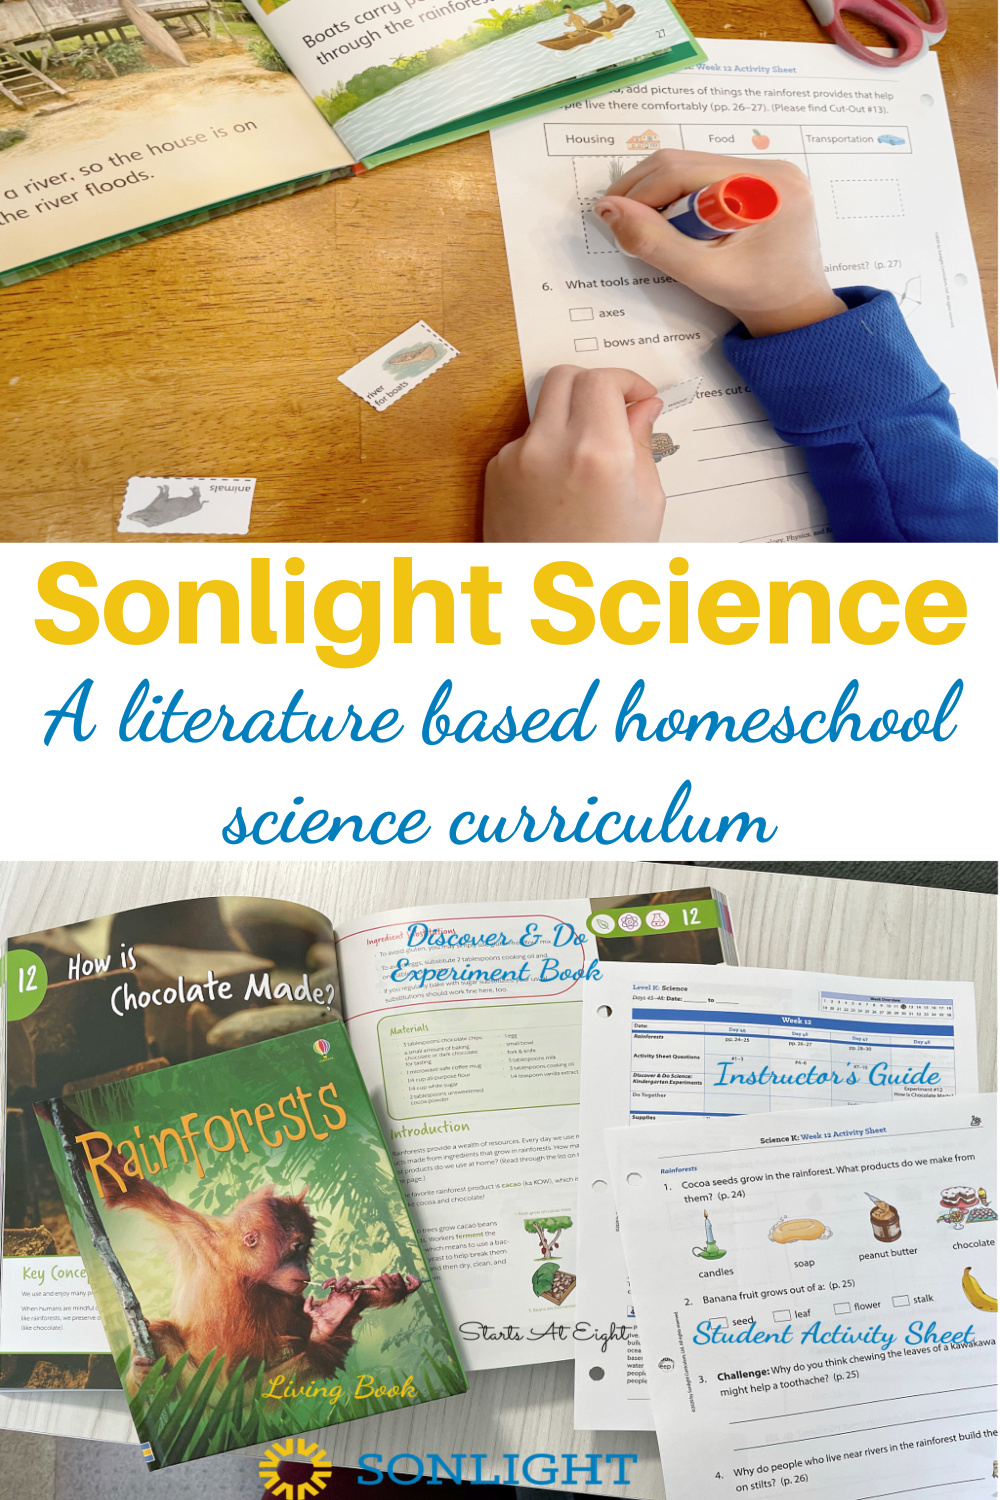 Sonlight Science Discover & Do is a homeschool science curriculum that uses literature along with hands-on experiments and worksheets to help engage kids in science topics.